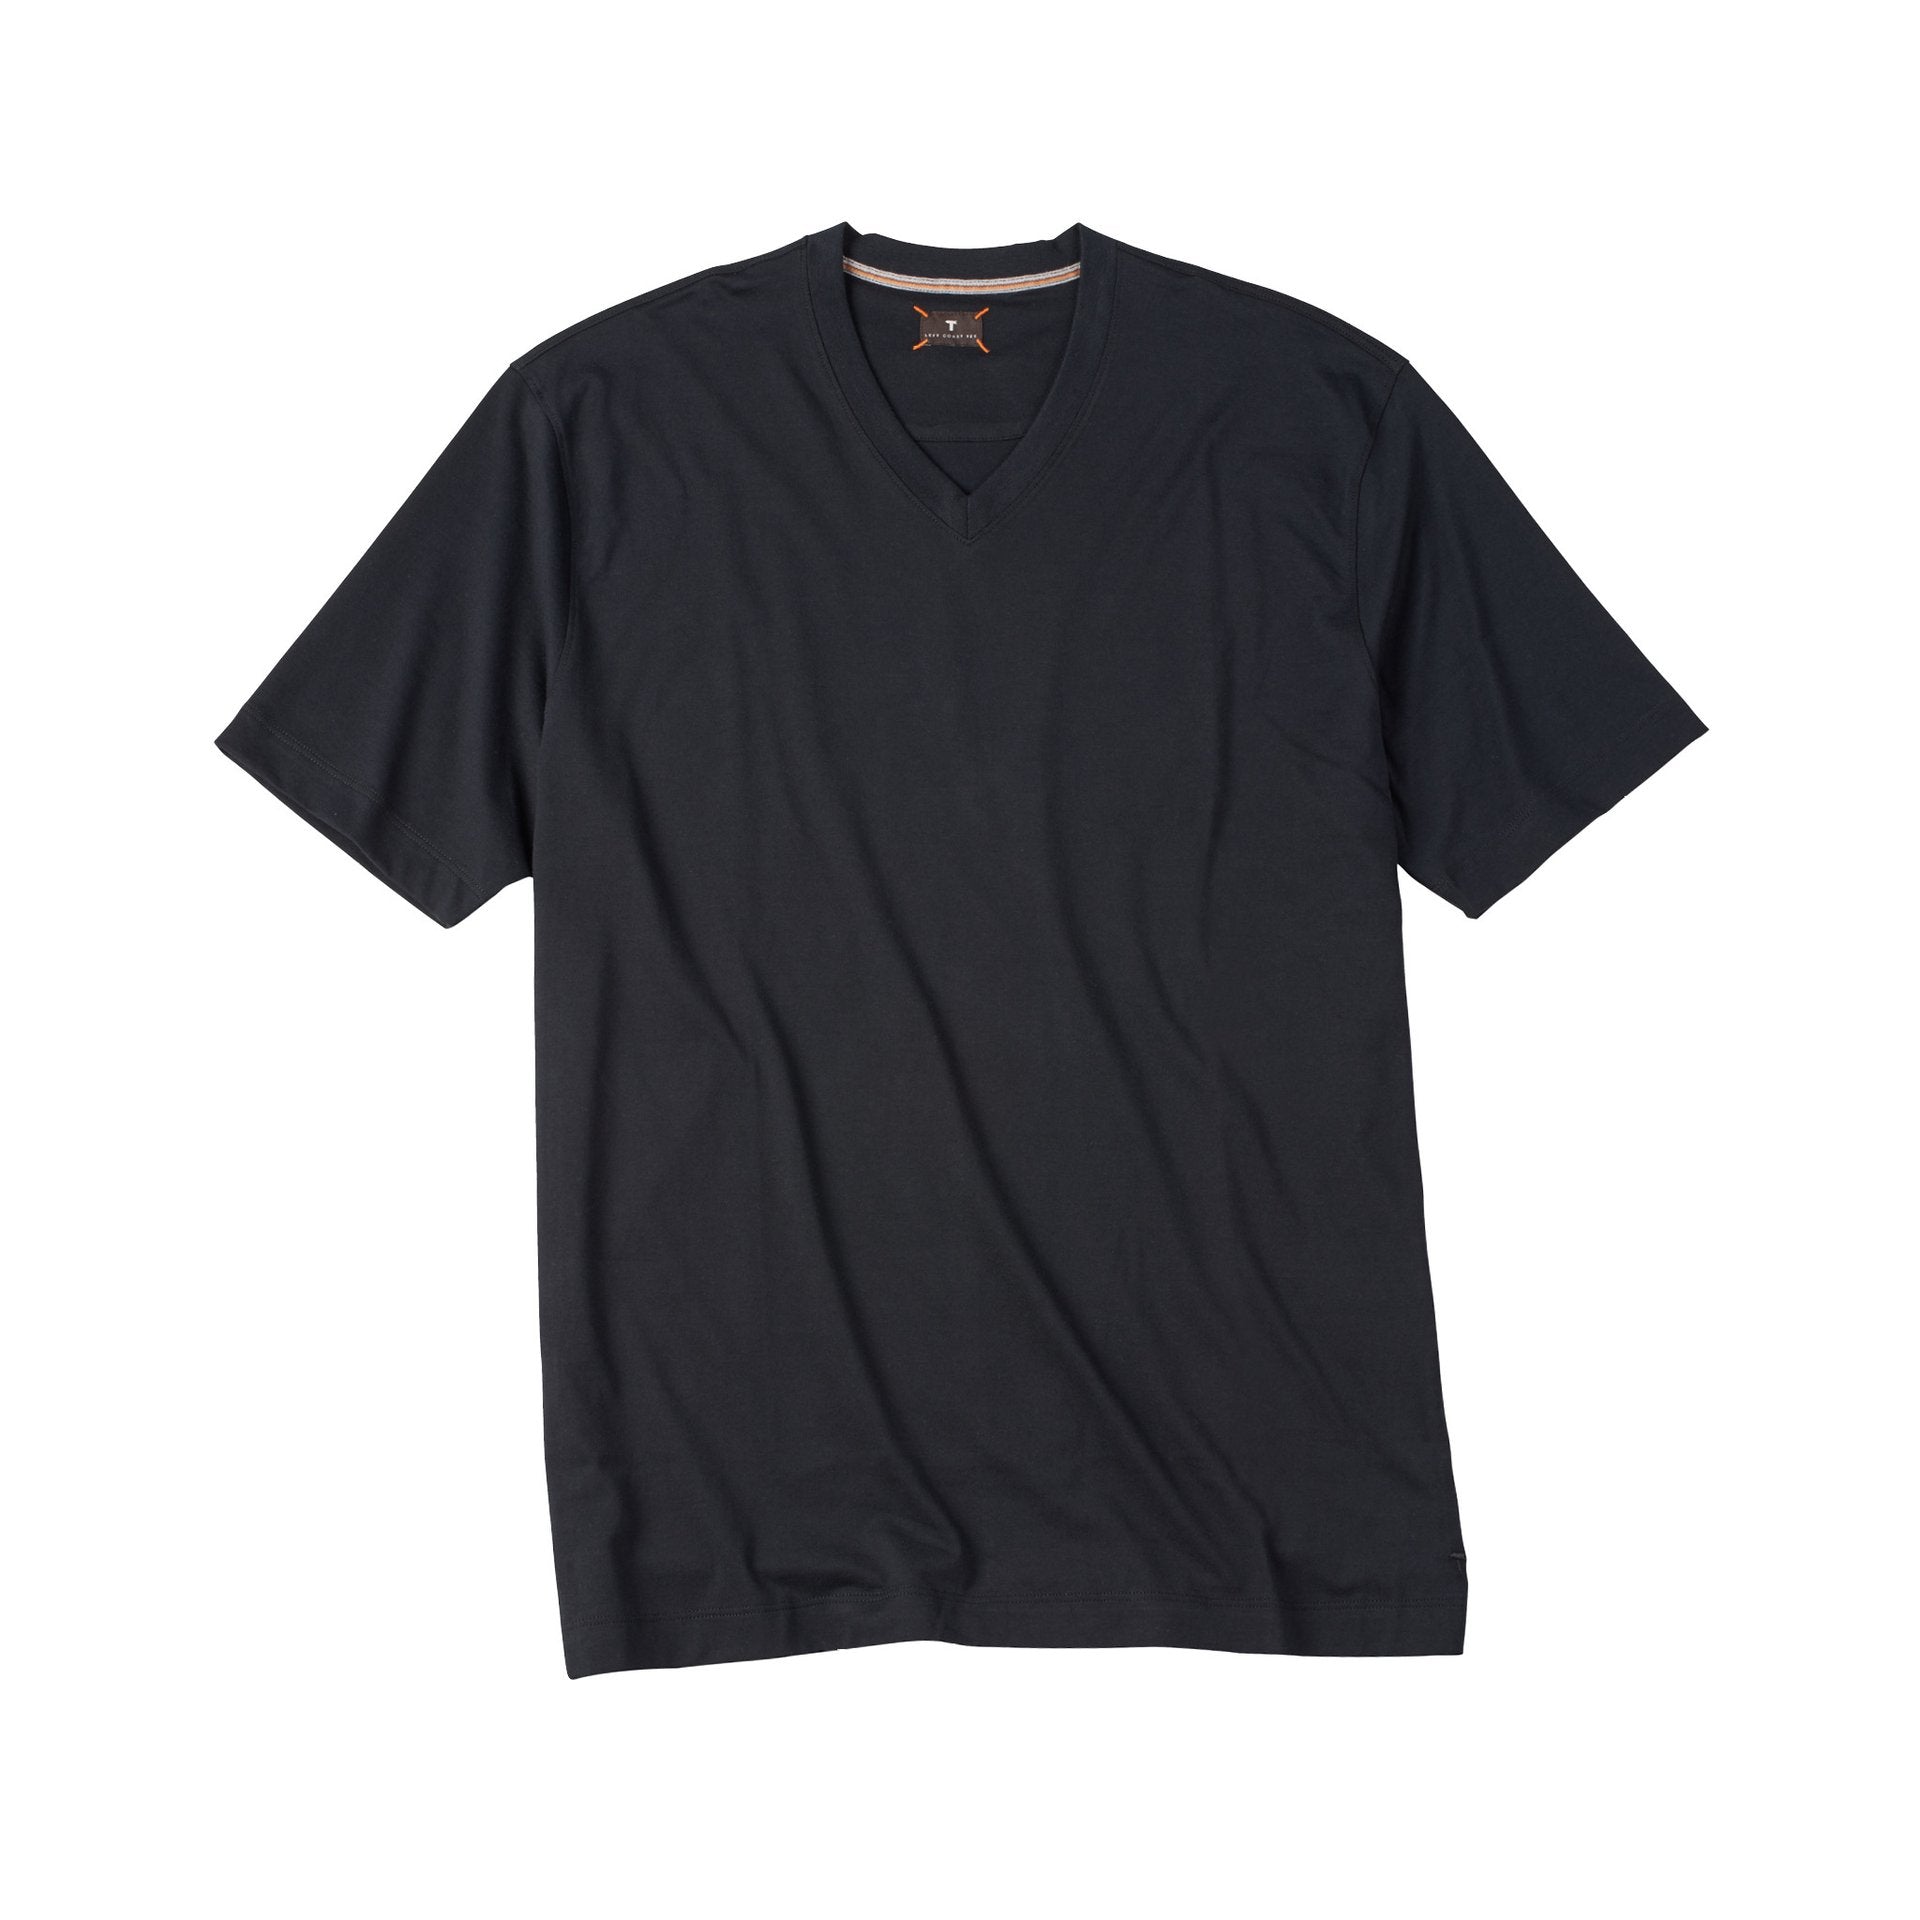 V-Neck Peruvian Cotton Tee Shirt in Black by Left Coast Tee